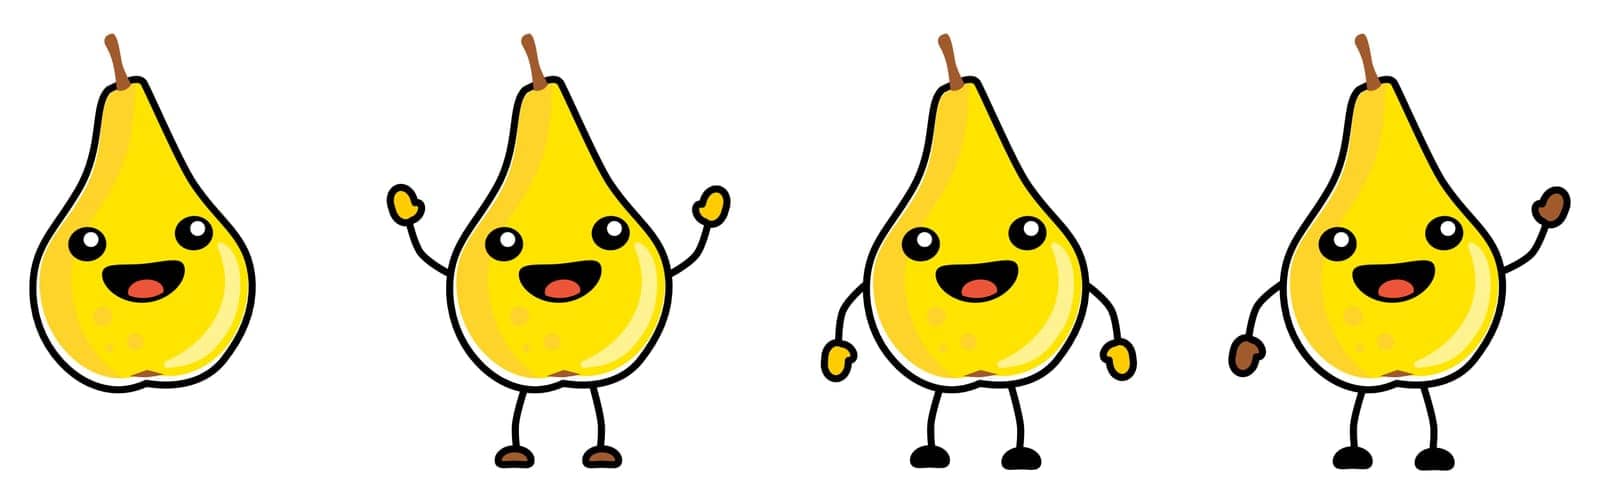 Cute kawaii style Pear fruit icon, outlined, large eyes, smiling with open mouth. Version with hands raised, down and waving by Ivanko